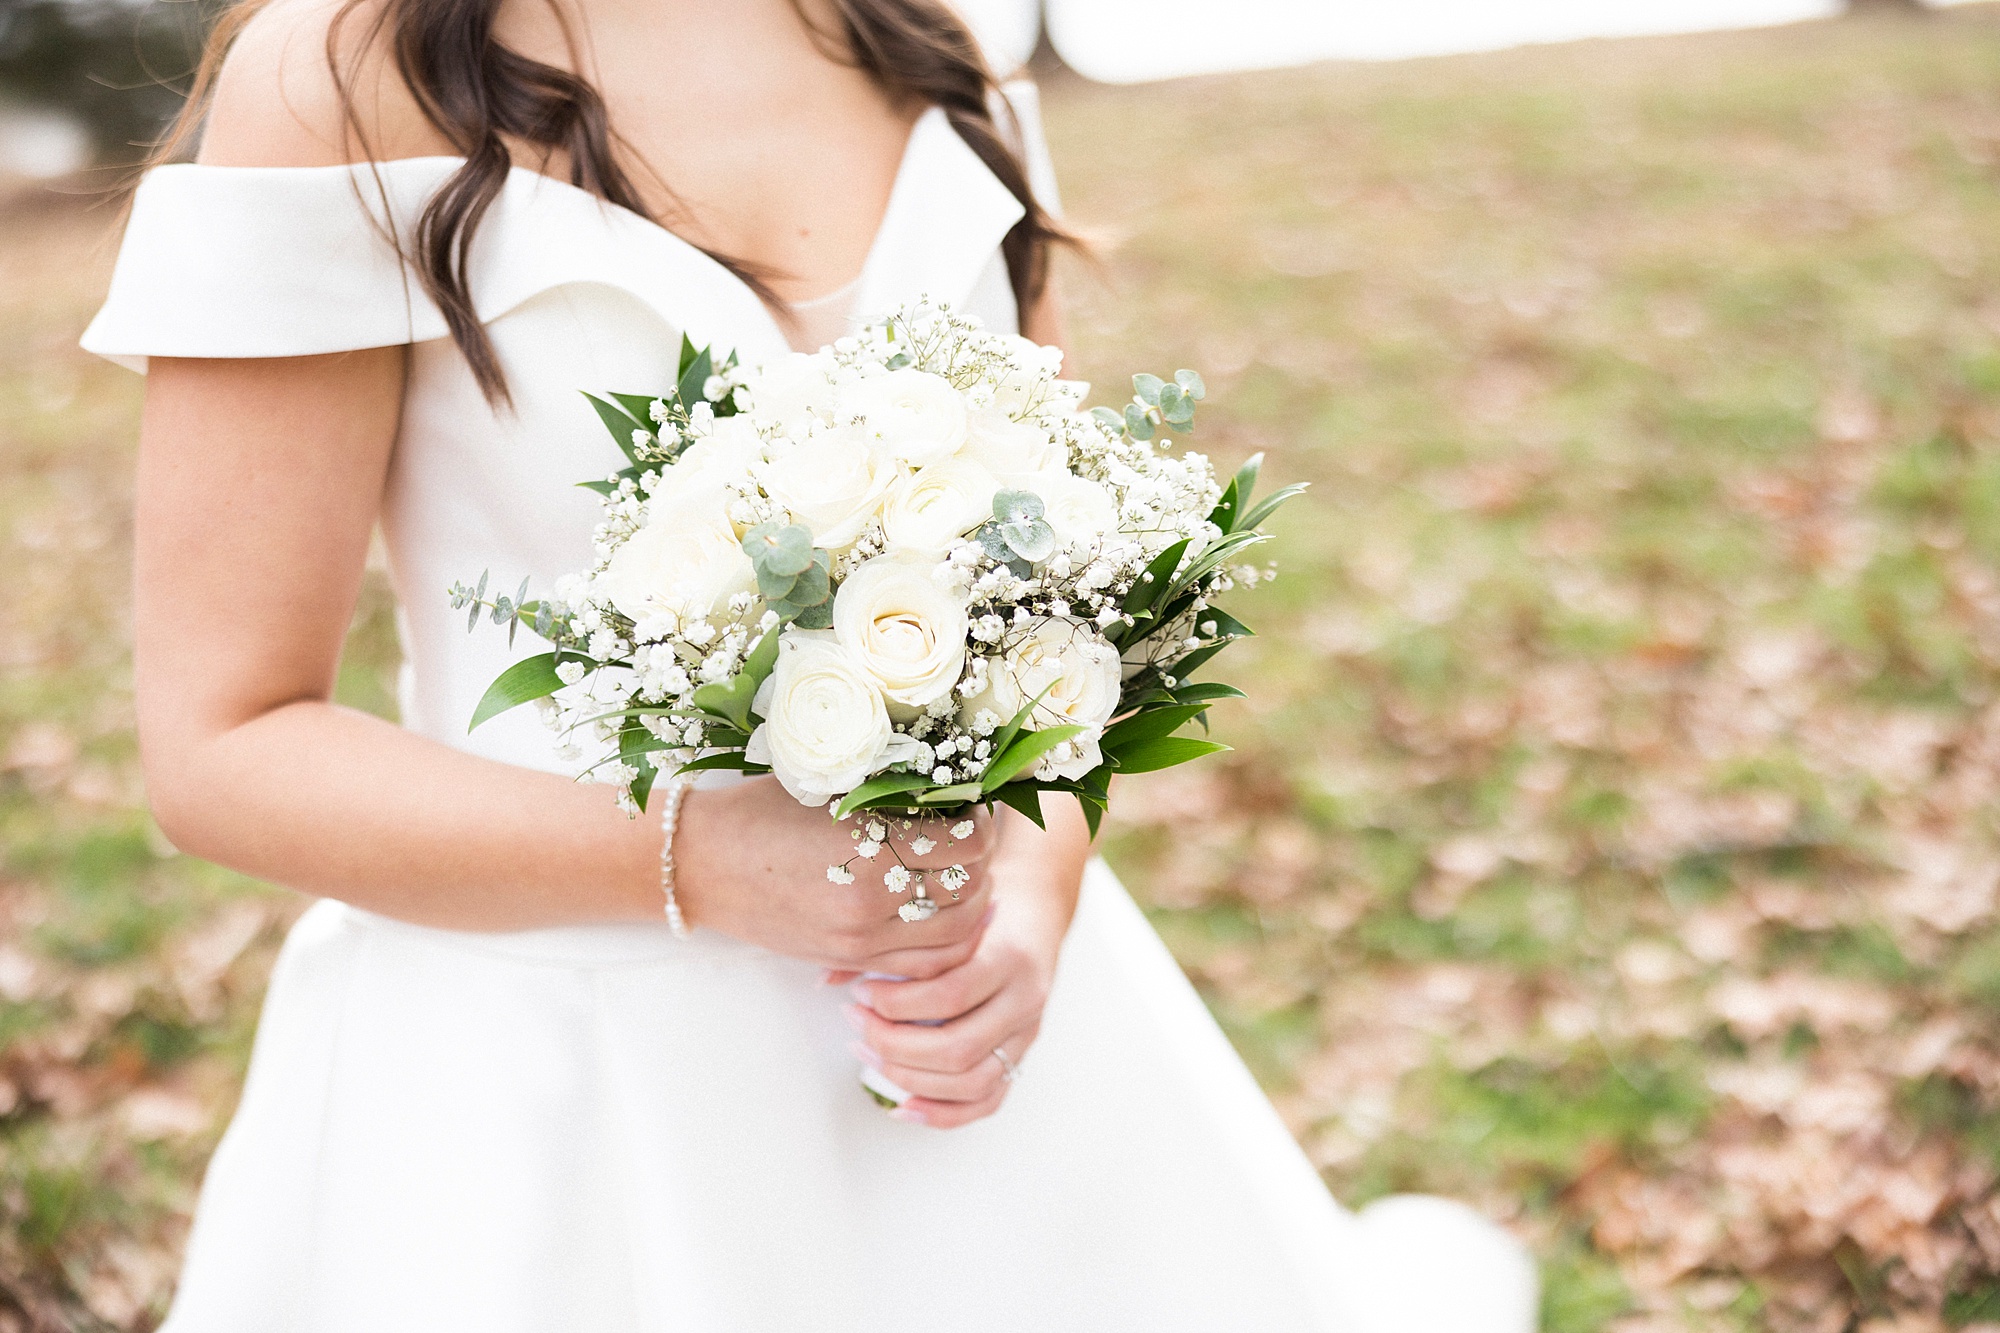 bride holds bouquet f white flowers with baby's breath